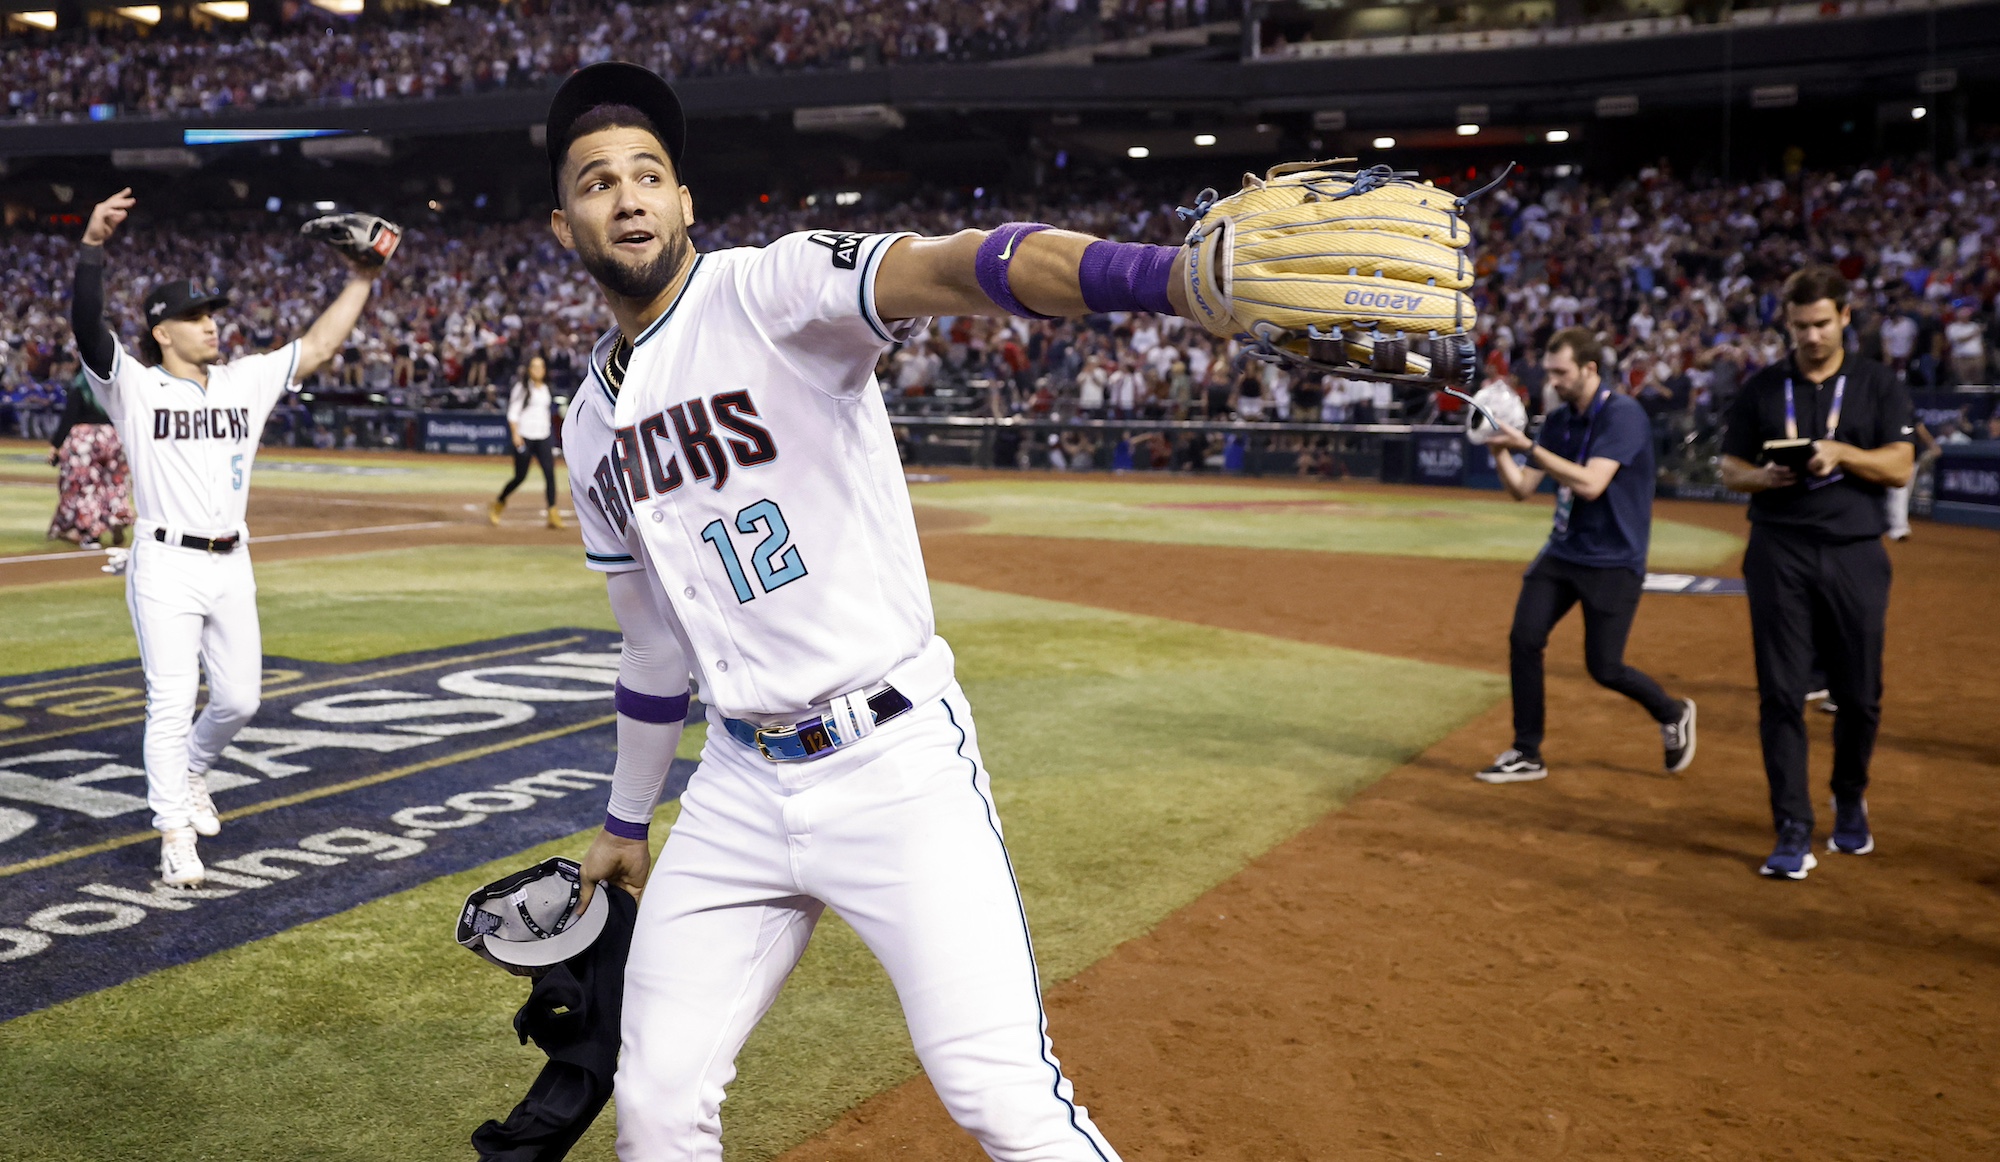 PHOENIX, AZ - OCTOBER 11: Lourdes Gurriel Jr. #12 of the Arizona Diamondbacks celebrates after winning against the Los Angeles Dodgers during Game 3 of the Division Series at Chase Field on Wednesday, October 11, 2023 in Phoenix, Arizona. The Arizona Diamondbacks won 4-2. (Photo by Chris Coduto/MLB Photos via Getty Images)